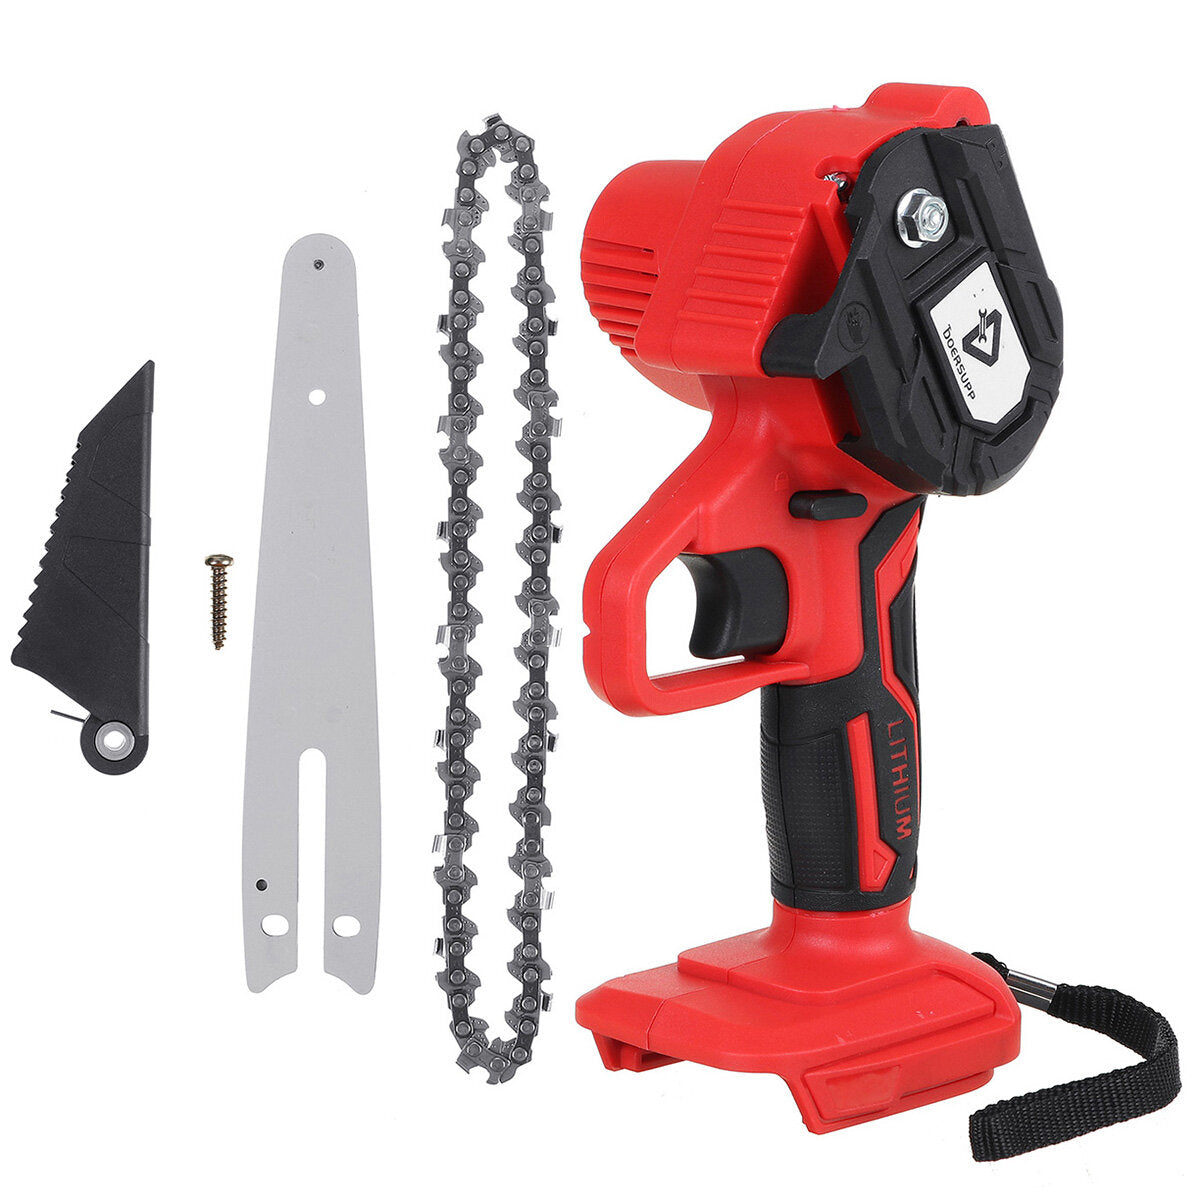 6 Inch Cordless Electric Chain Saw Chainsaw 3000W Mini Woodworking Wood Cutter One-Hand Saws